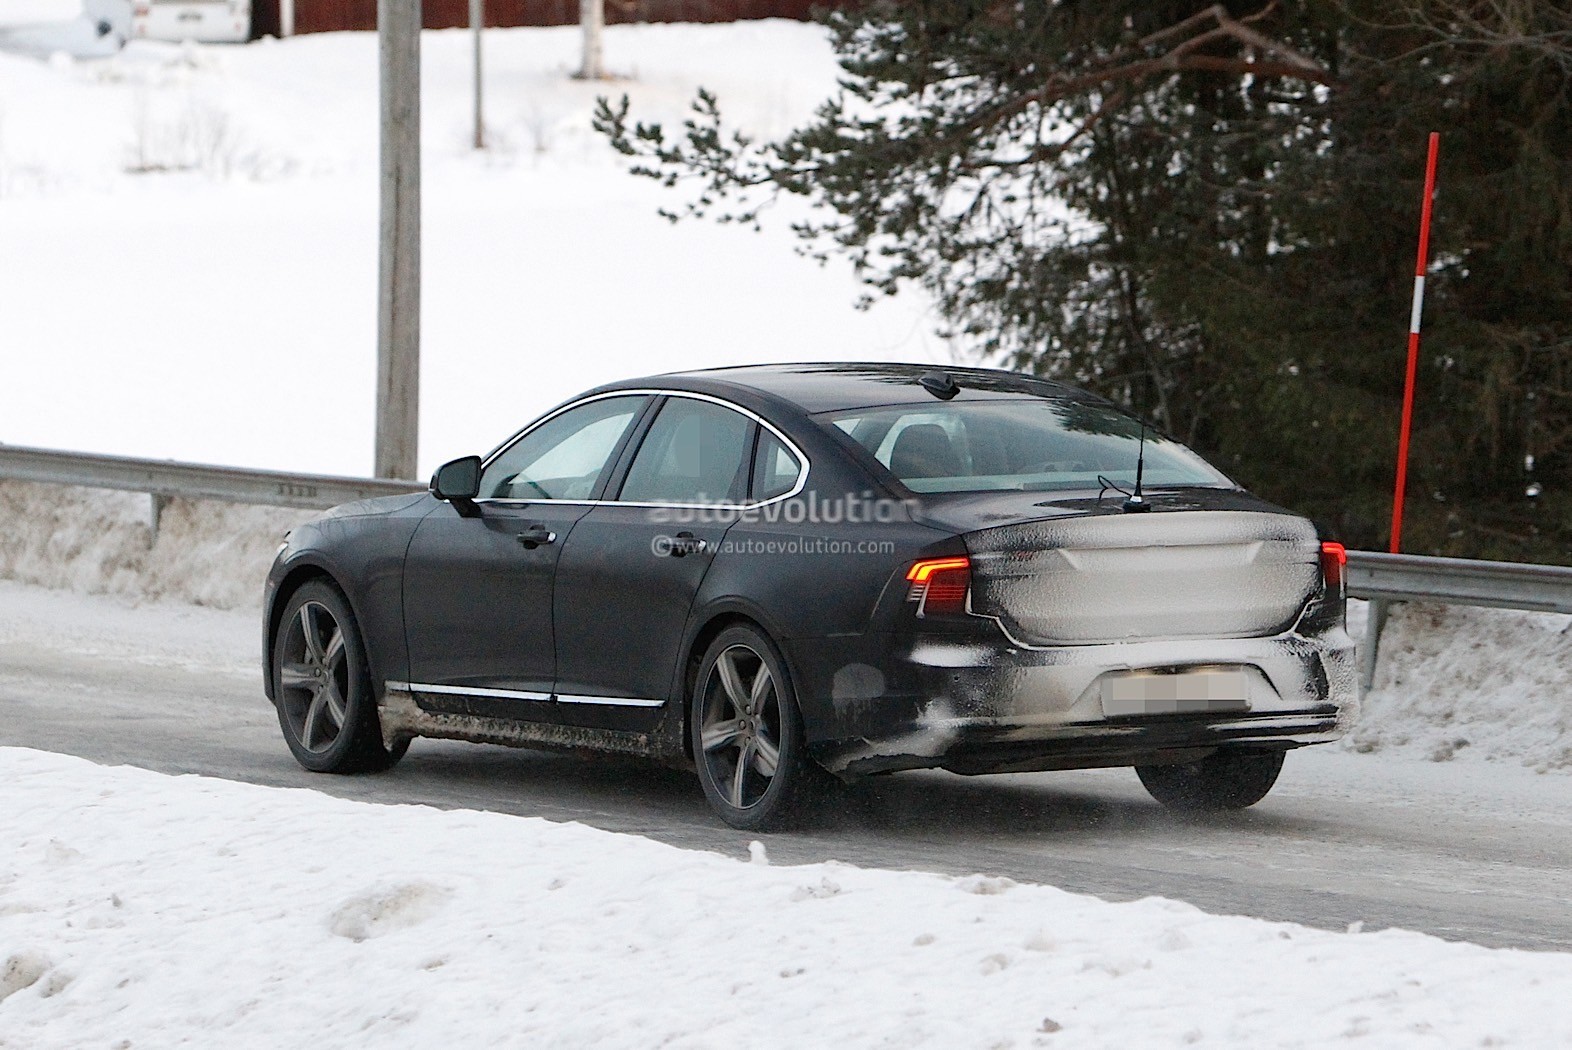 https://s1.cdn.autoevolution.com/images/news/gallery/2021-volvo-s90-and-v90-facelift-wear-useless-camouflage-winter-testing_16.jpg